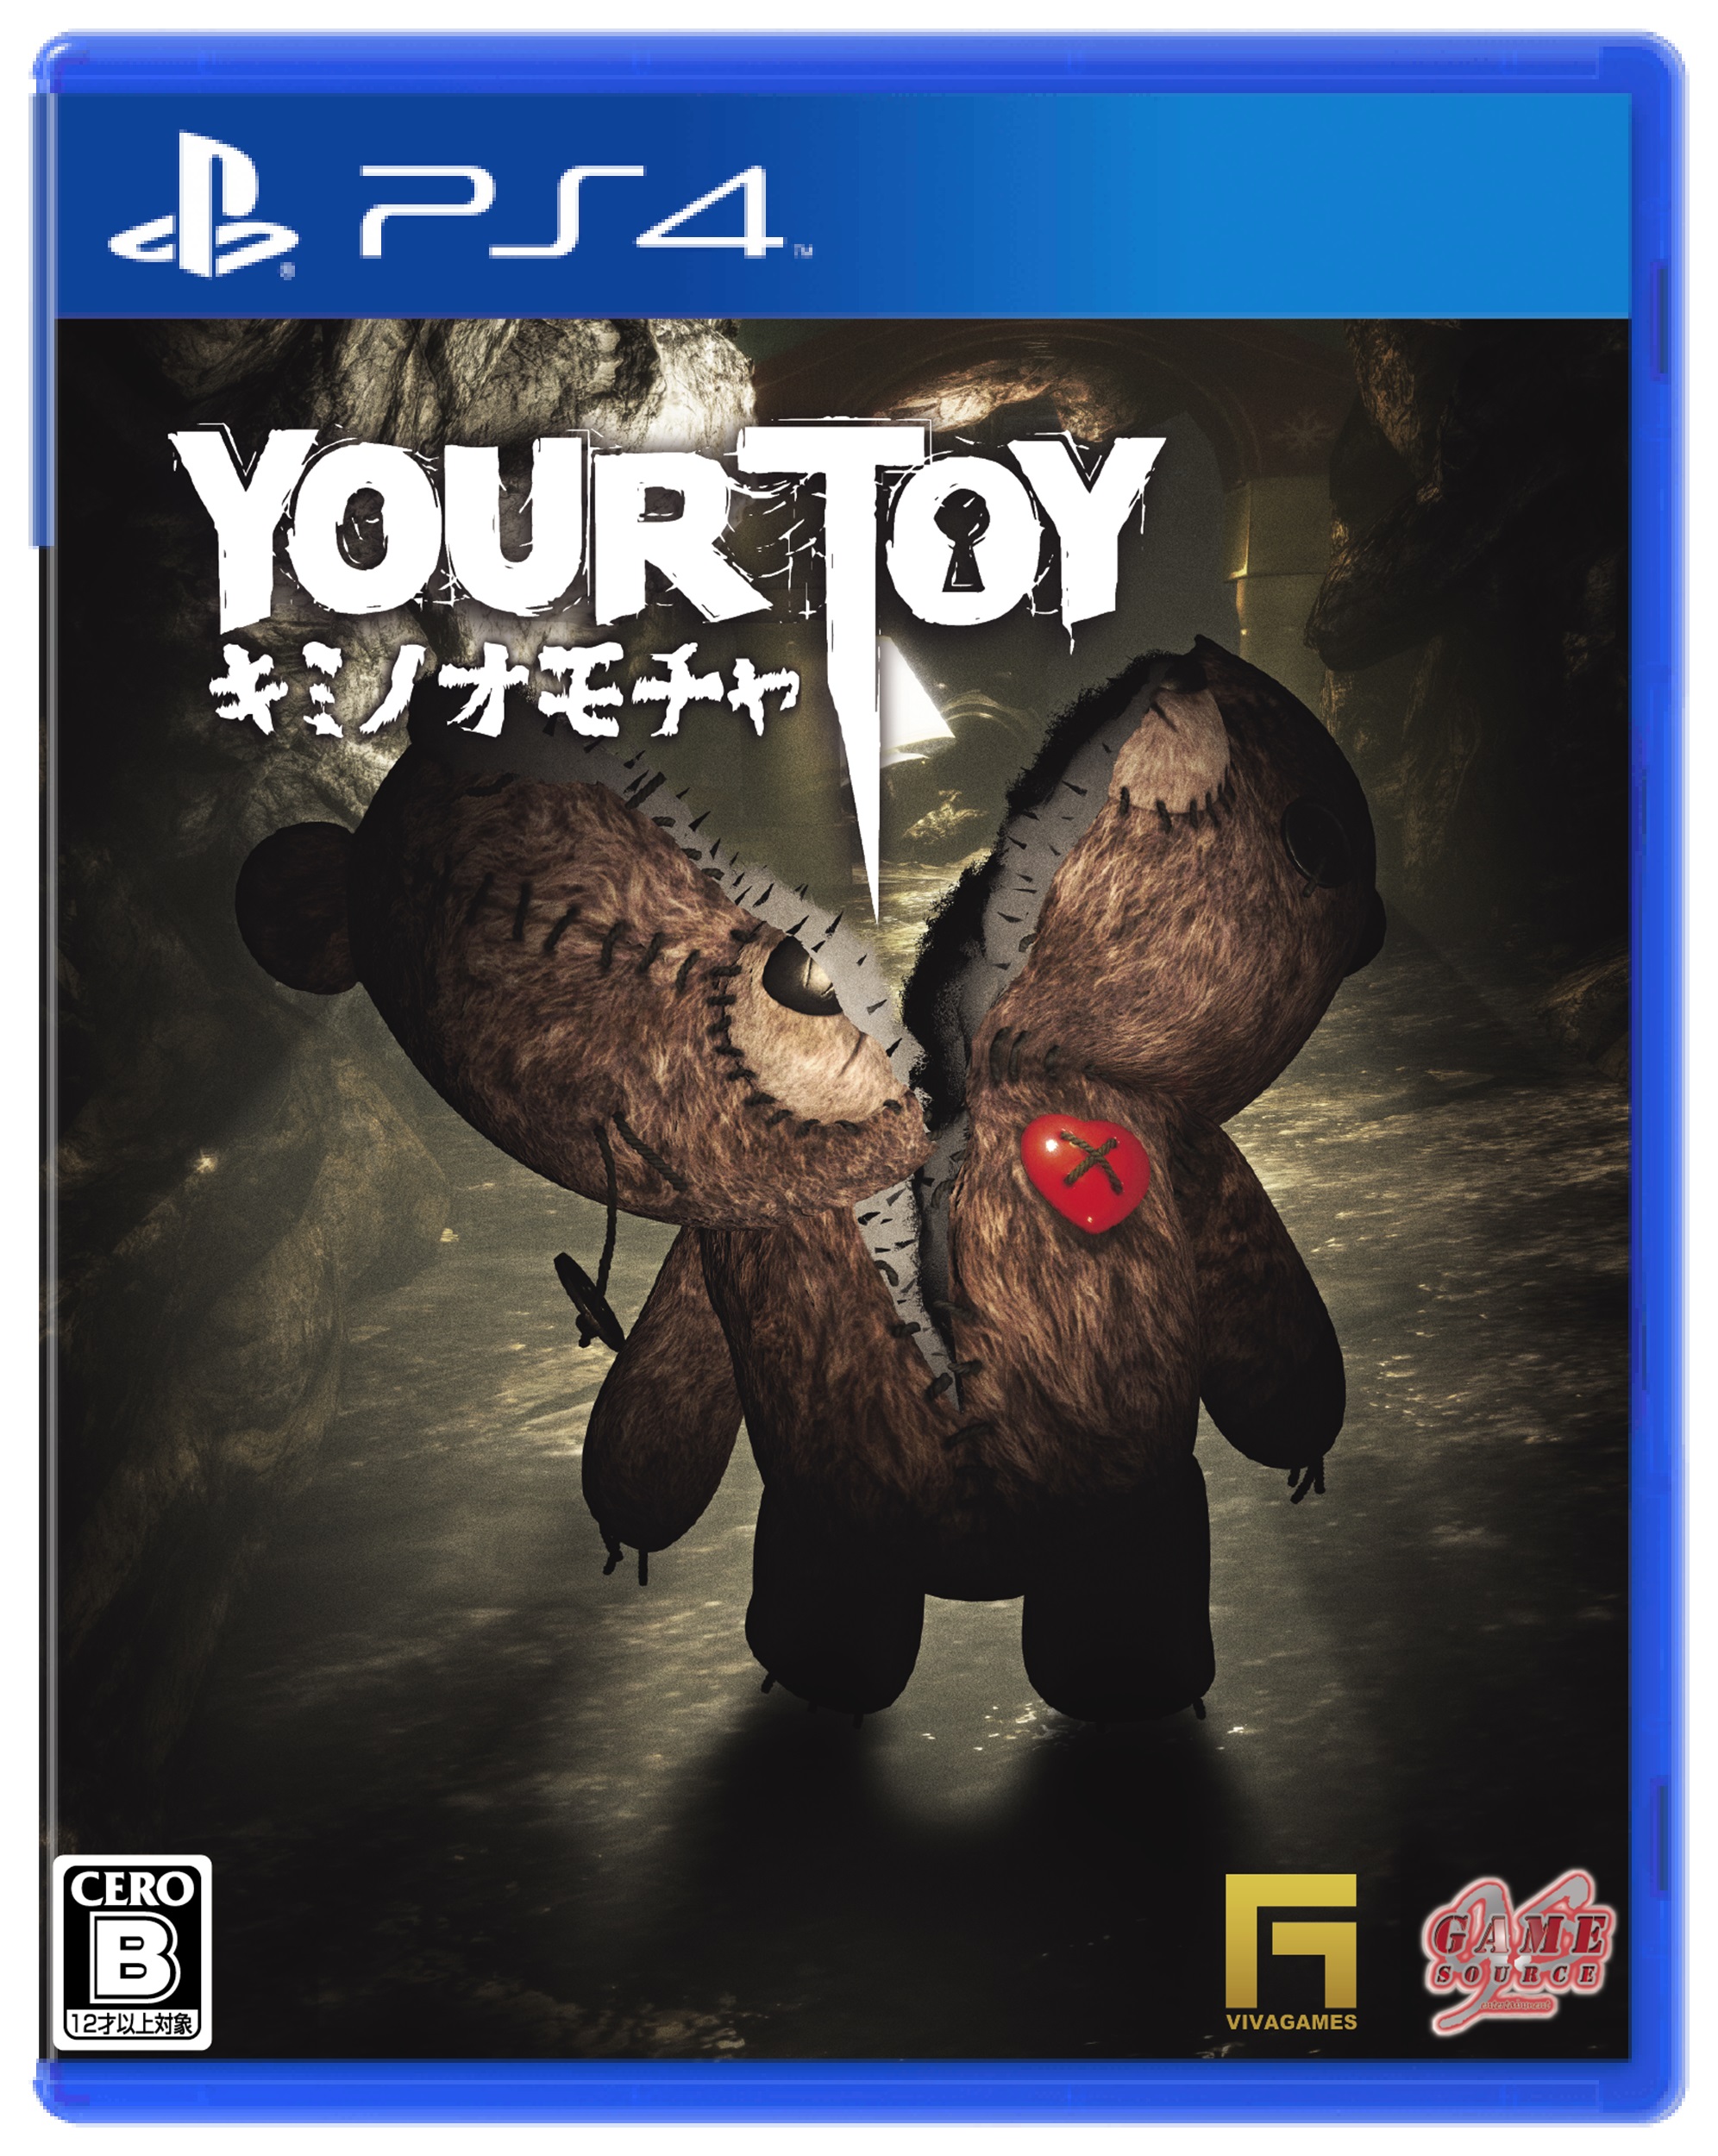 YOUR TOY,キミノオモチャ,VIVAGAMES,PS4,GSE,